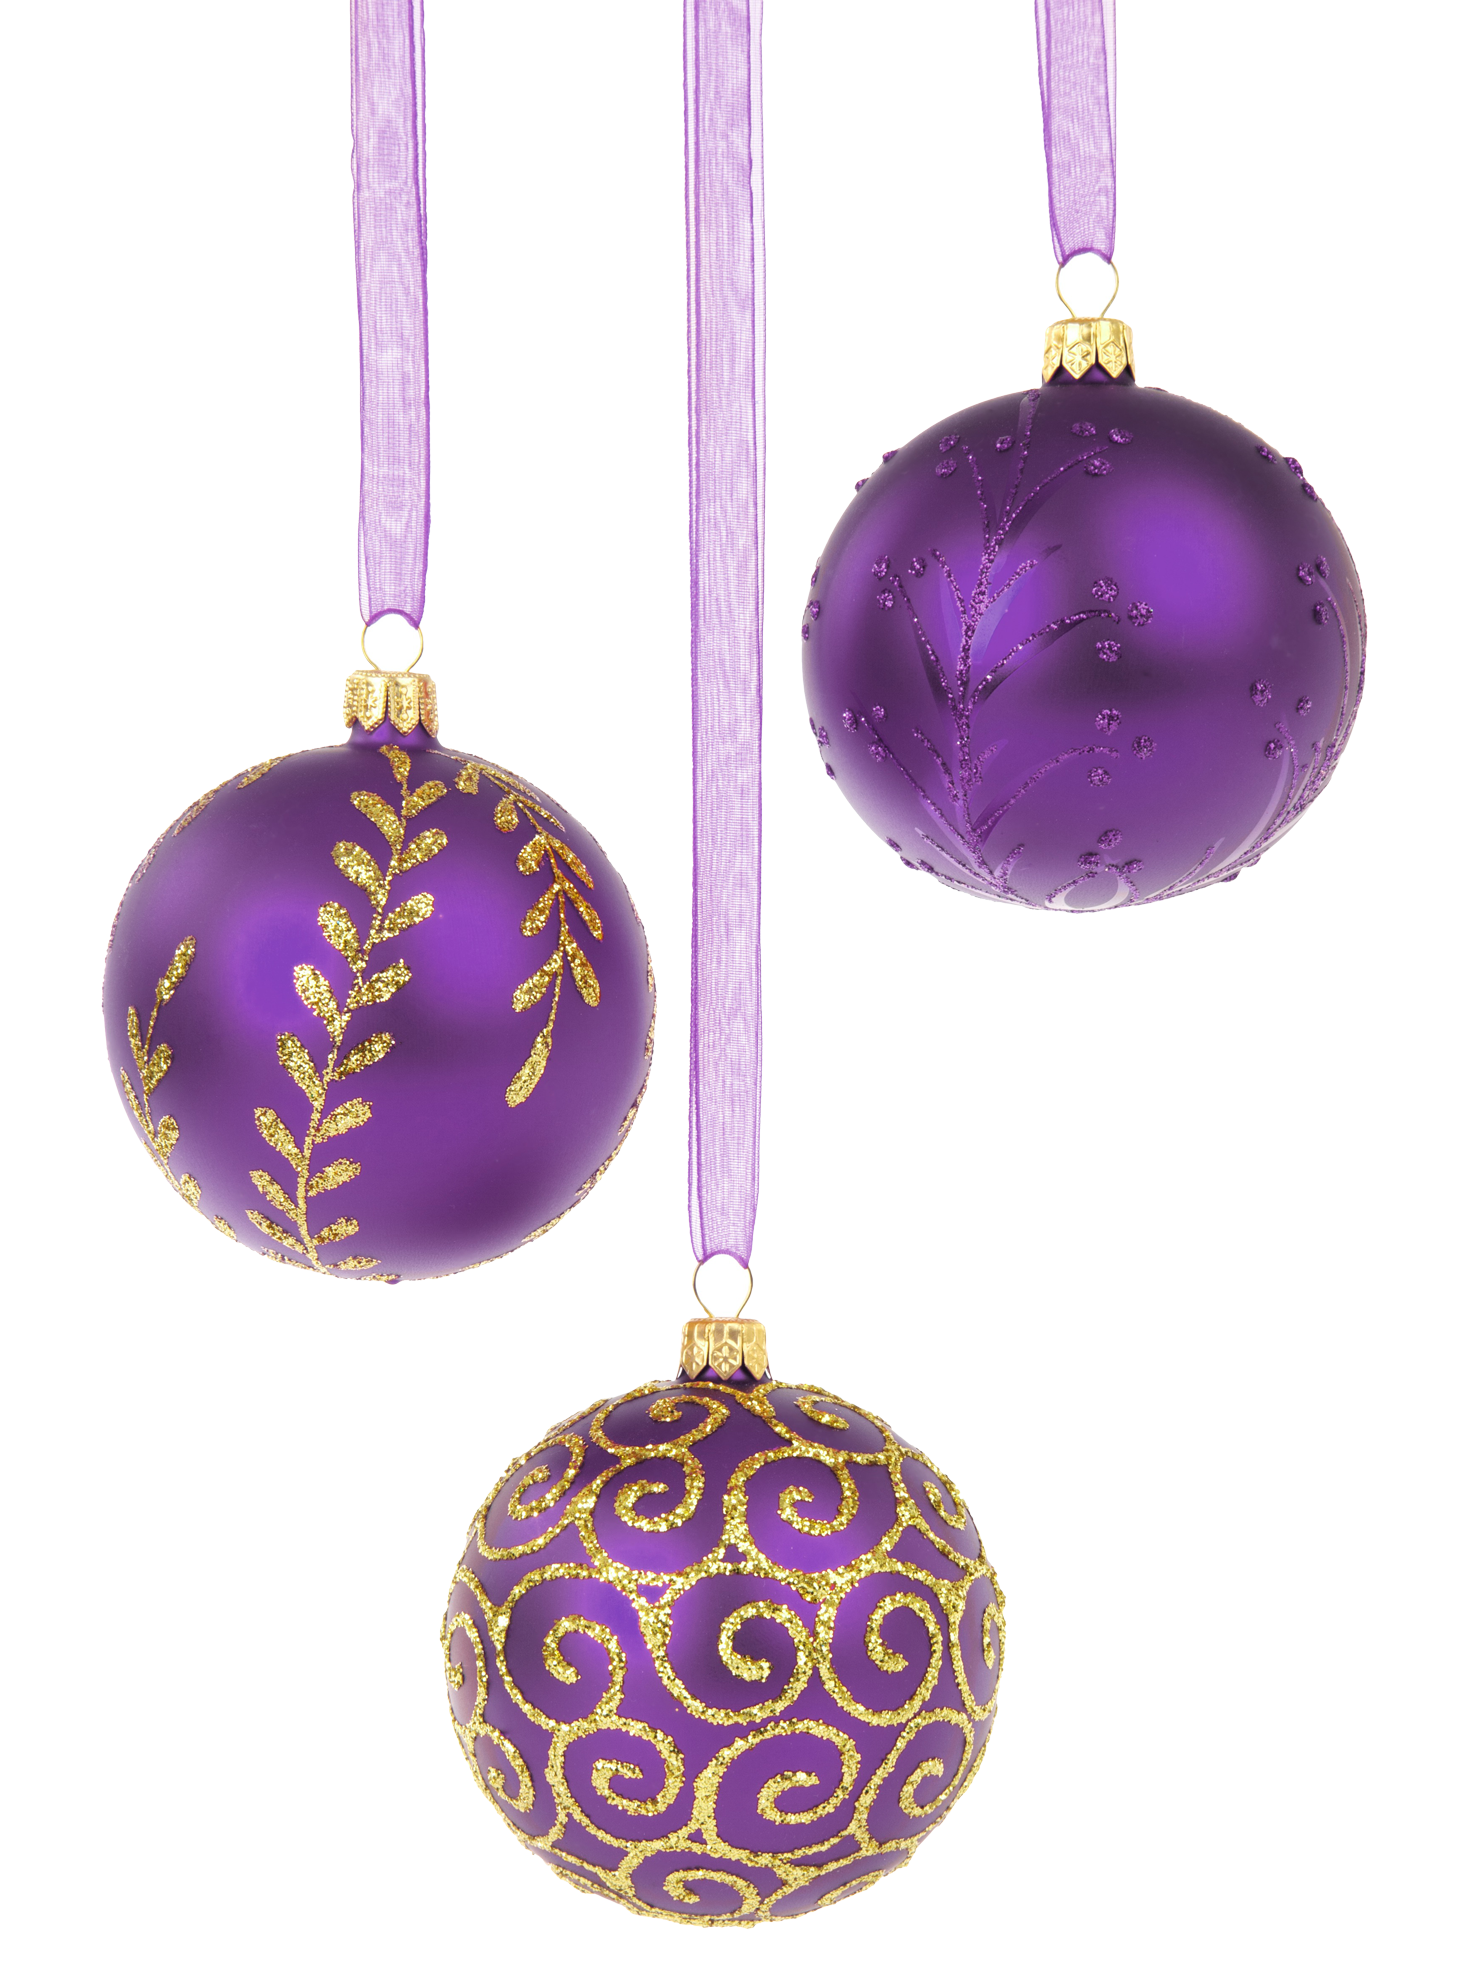 Glitter Christmas Bauble Free Photo PNG Image